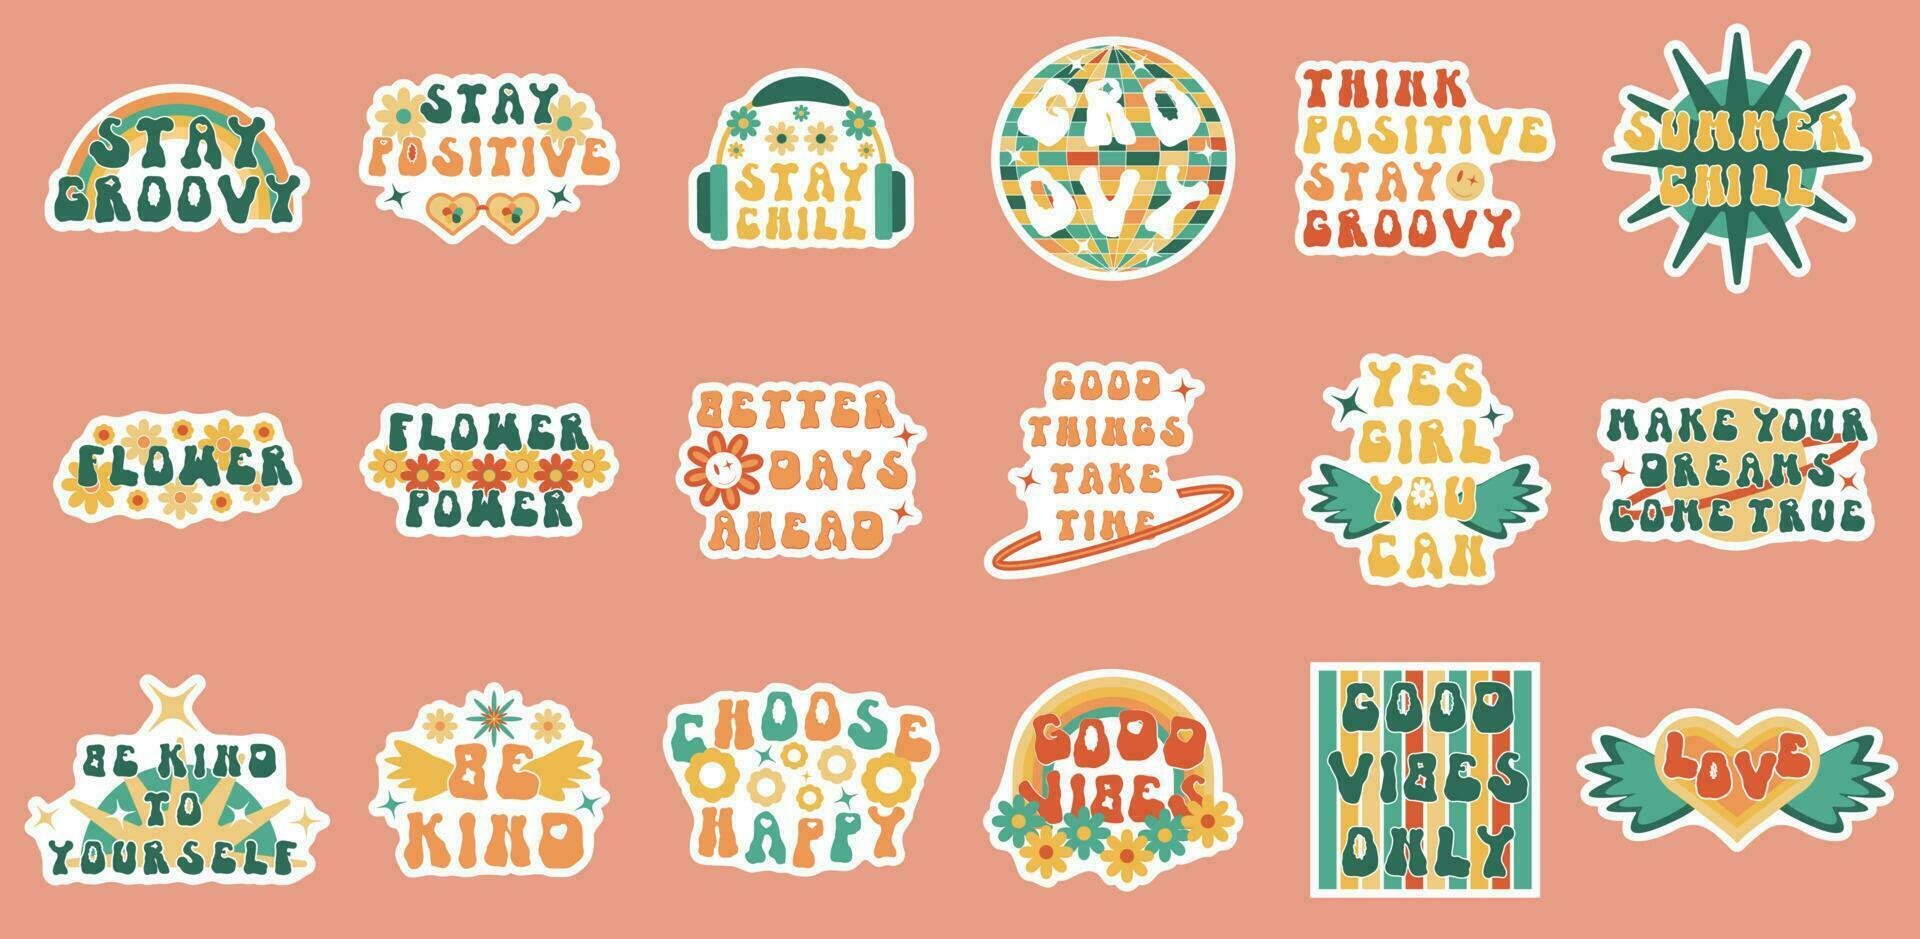 Isolated groovy trippy rave planner sticker set with white offset for print. Daisy camomile flower sublimation slogan vintage typography collection. 90s vibe funky positive retro quote vector. vector